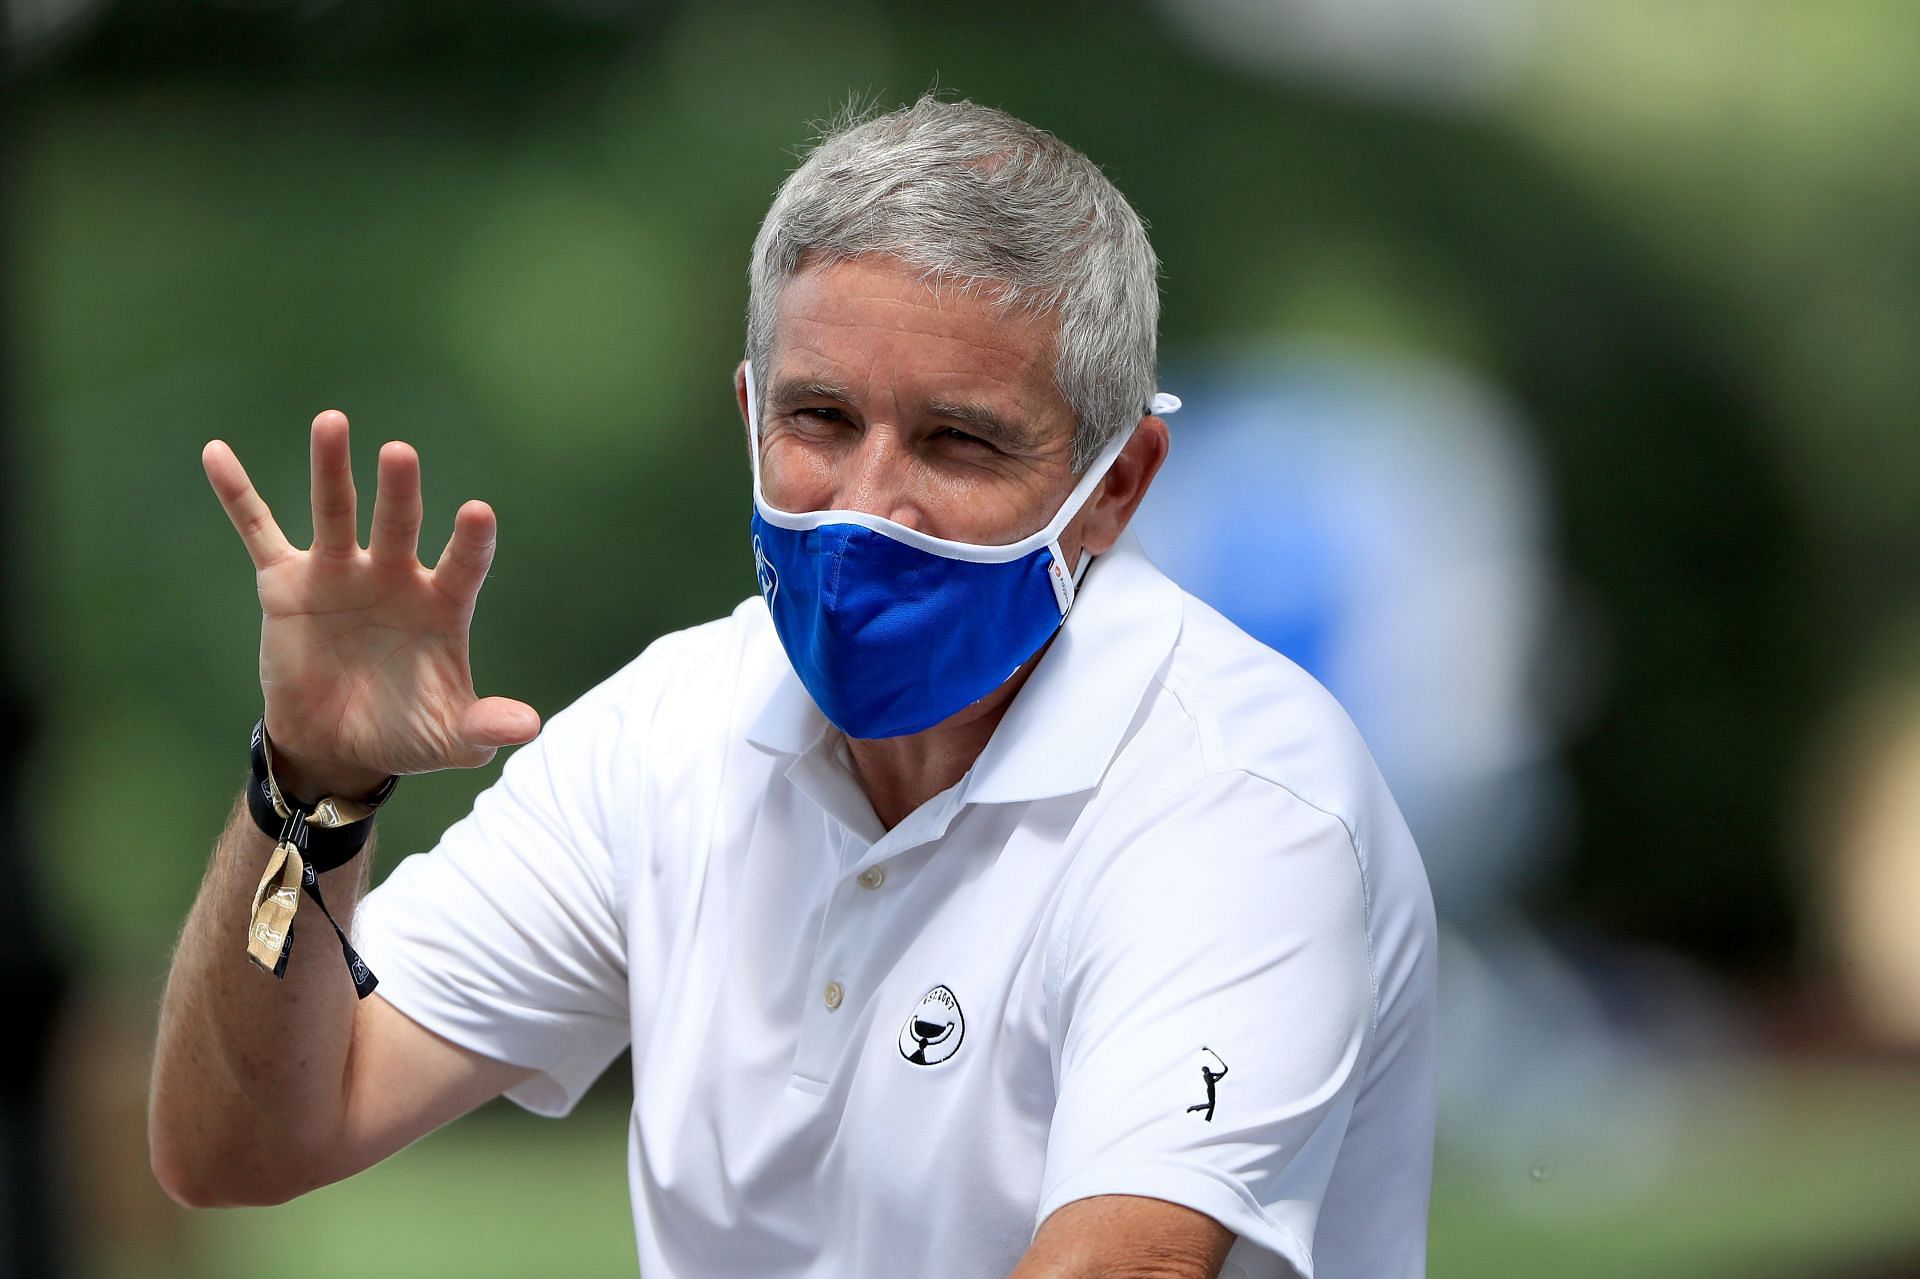 Jay Monahan during the 2020 Tour Championship